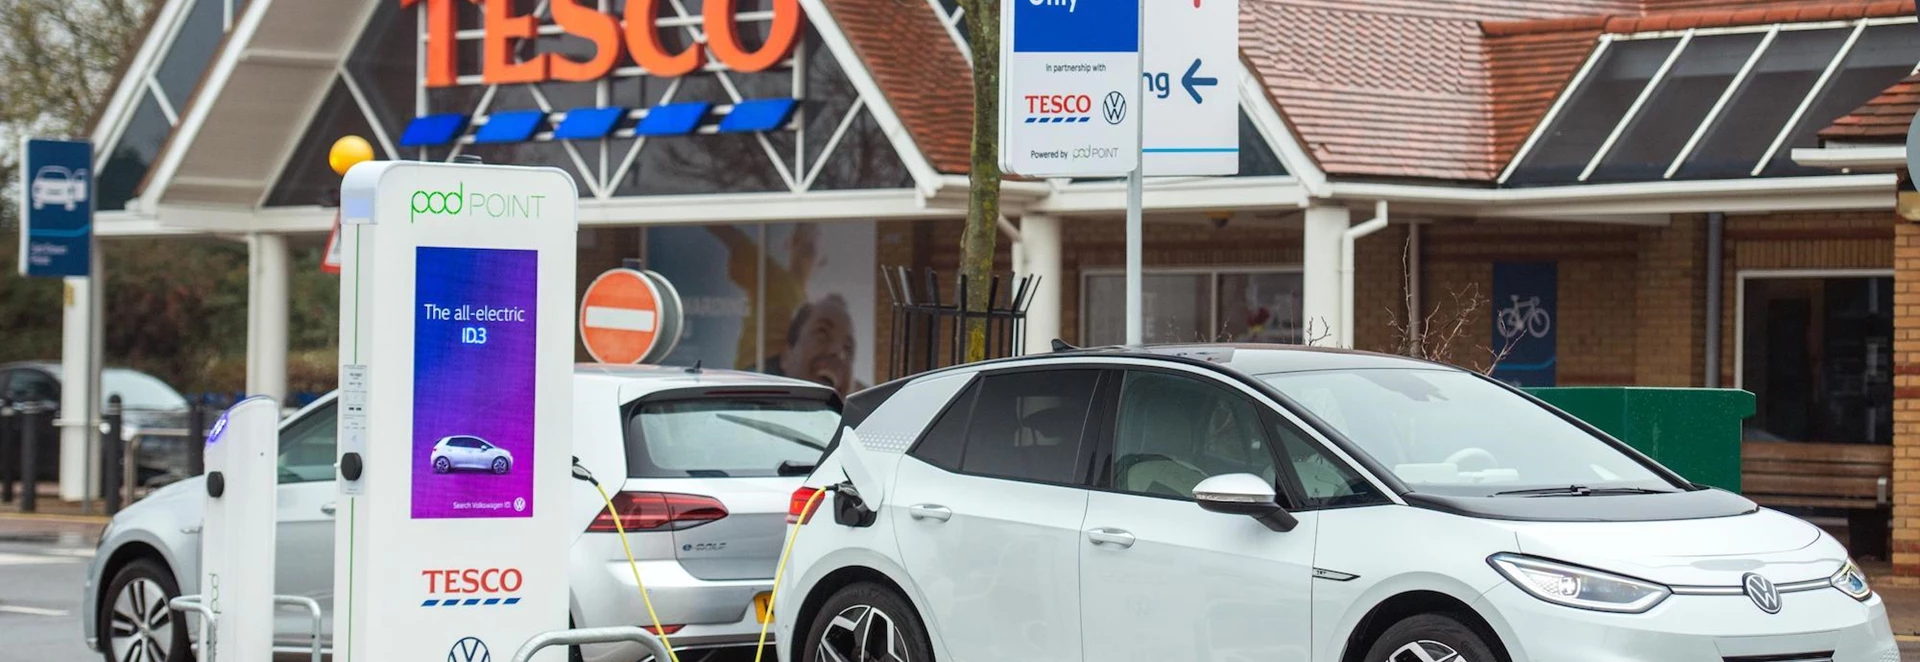 Volkswagen and Tesco roll out free EV charging at over 100 stores